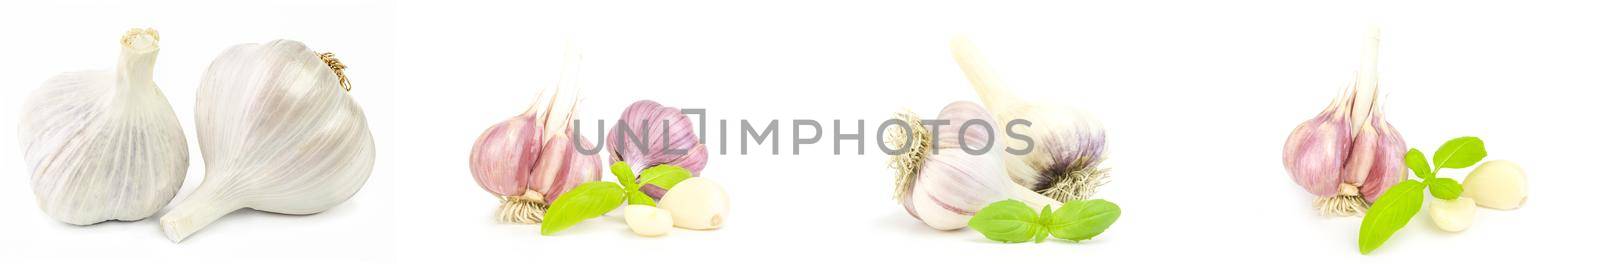 Group of Garlic isolated on a white background with clipping path by Proff